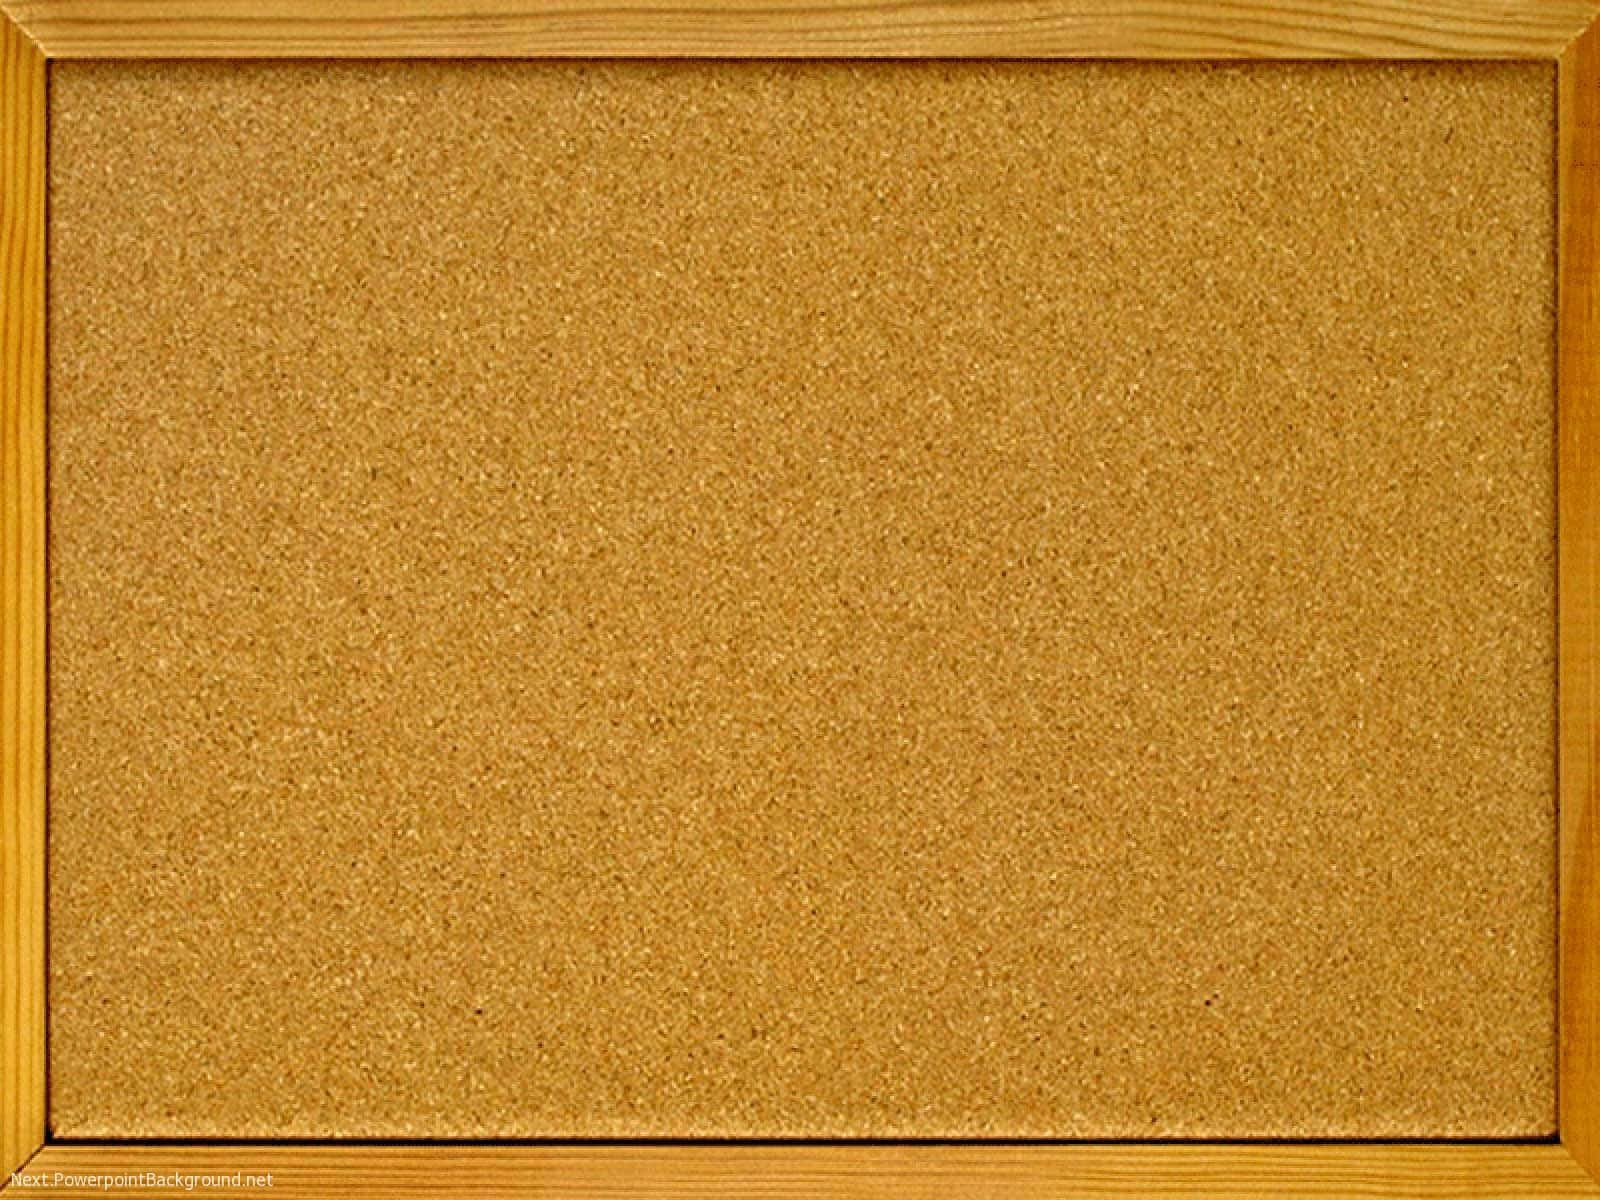 A Wooden Frame With A Cork Board